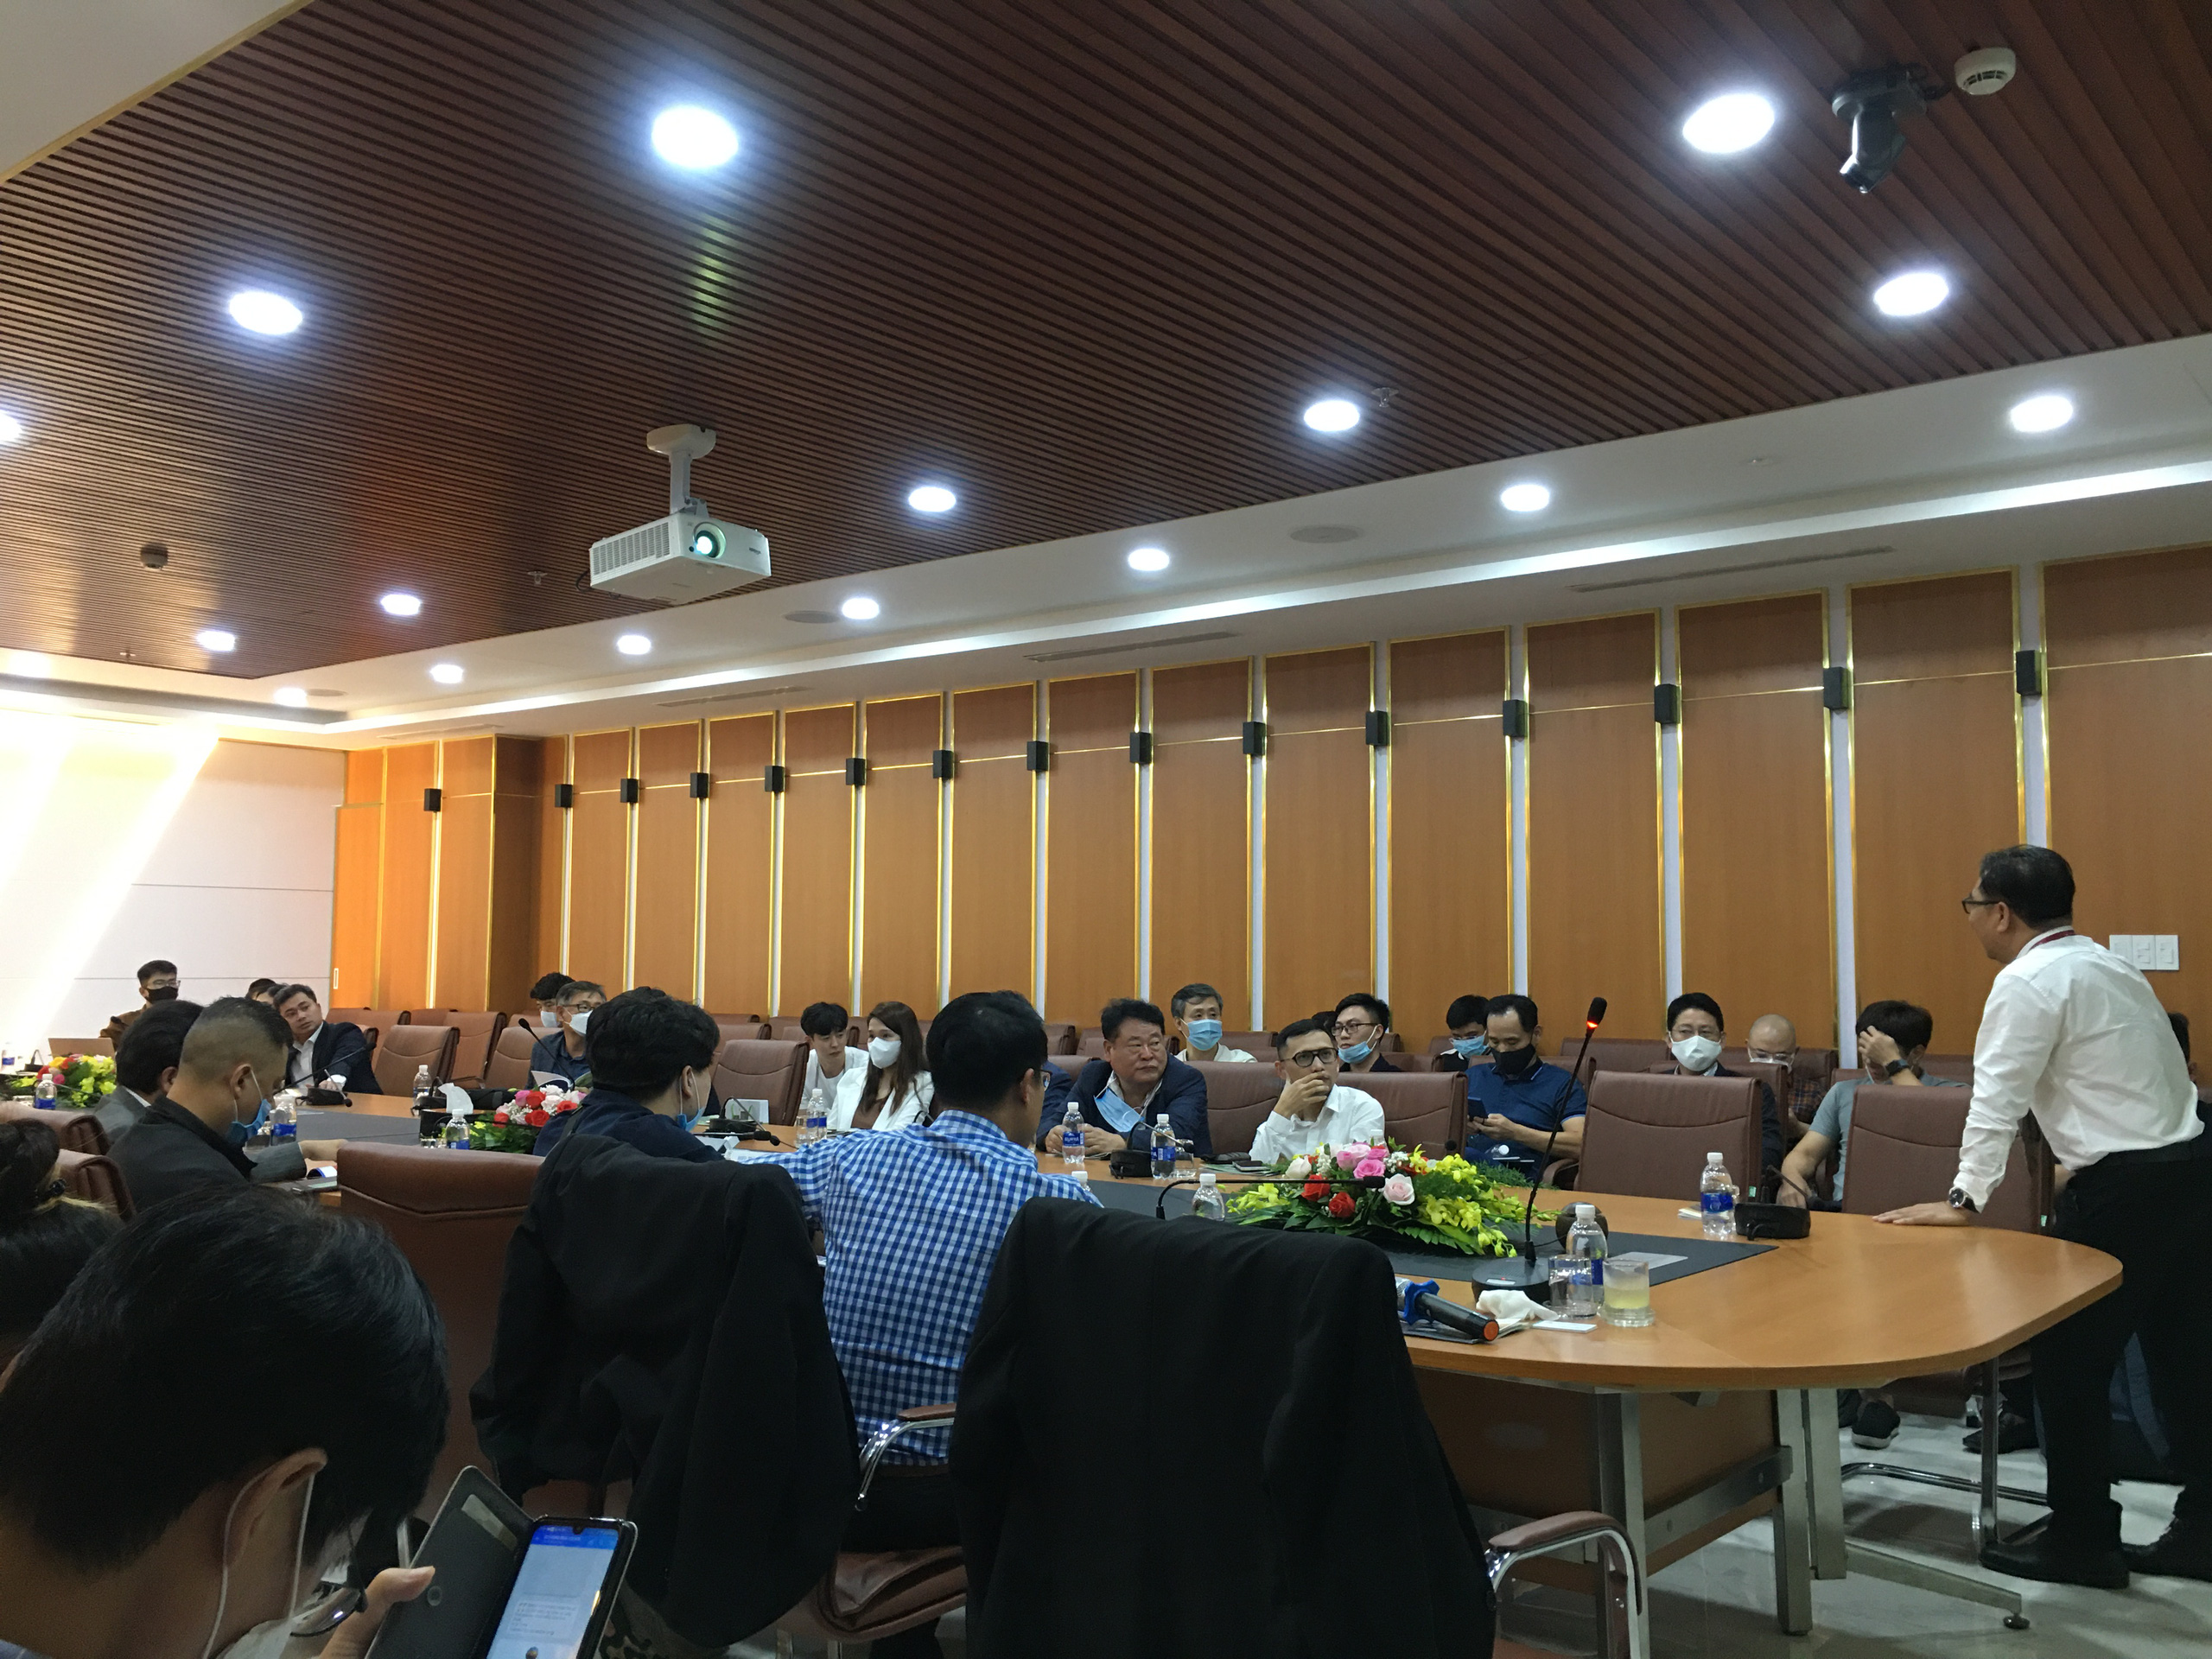 Nearly 30 Korean businesses seek investment opportunities in ‘Da Nang Silicon Valley’